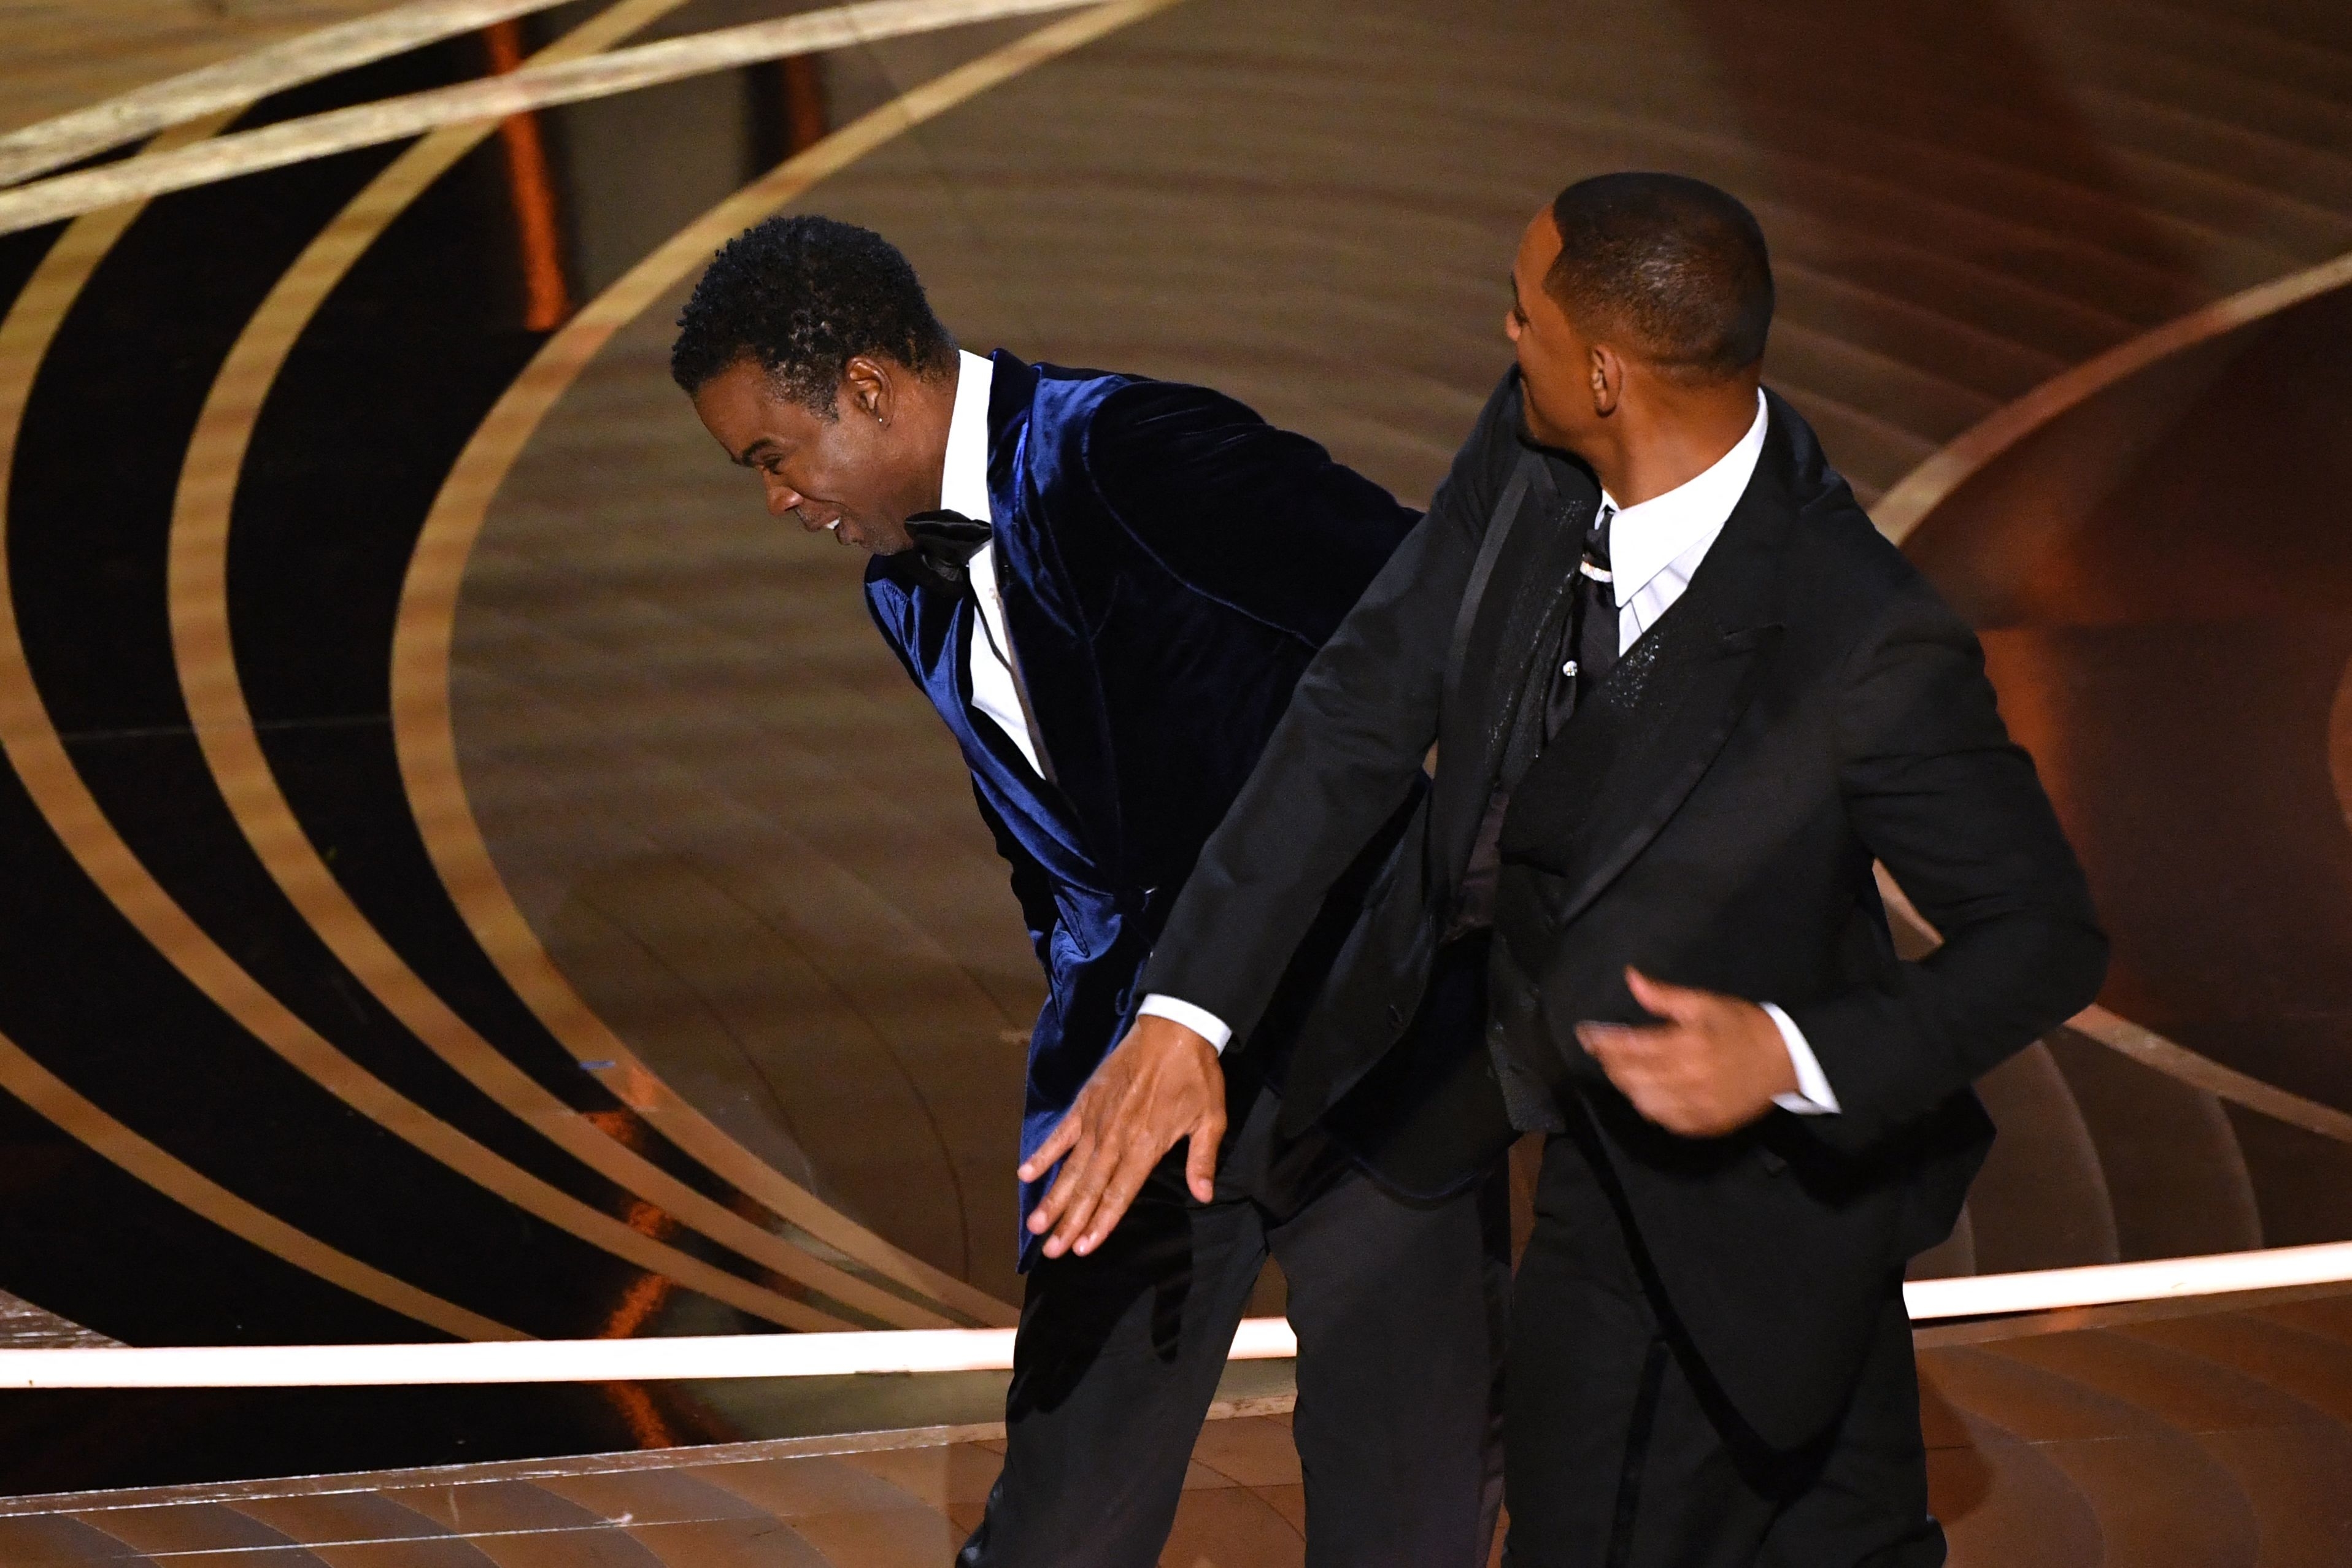 Will slapping Chris Rock at the Oscars